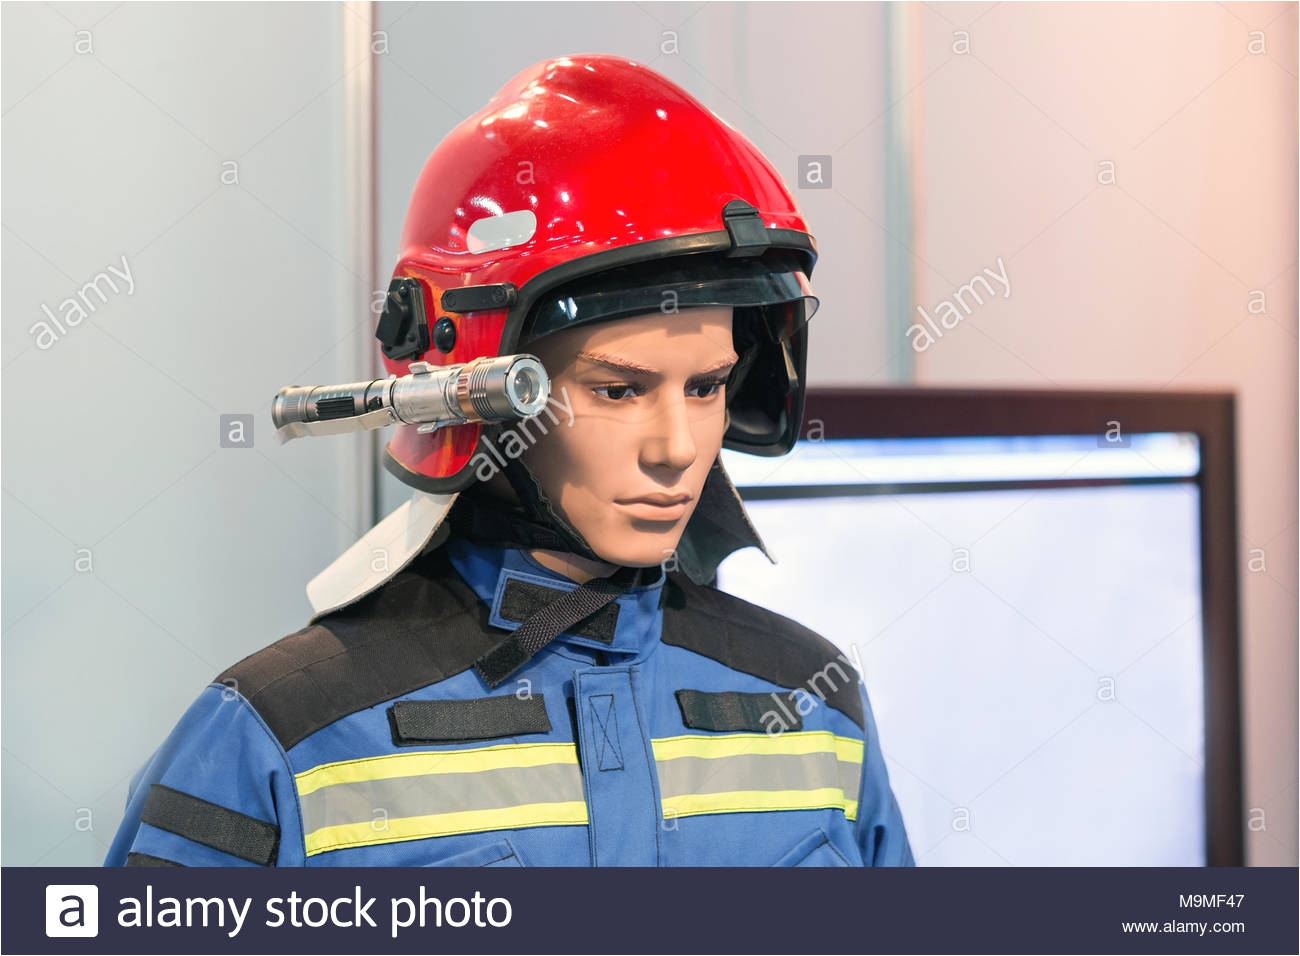 exhibition firefighter dummy in fire fighter helmet and uniform protective rescue wear head light torch